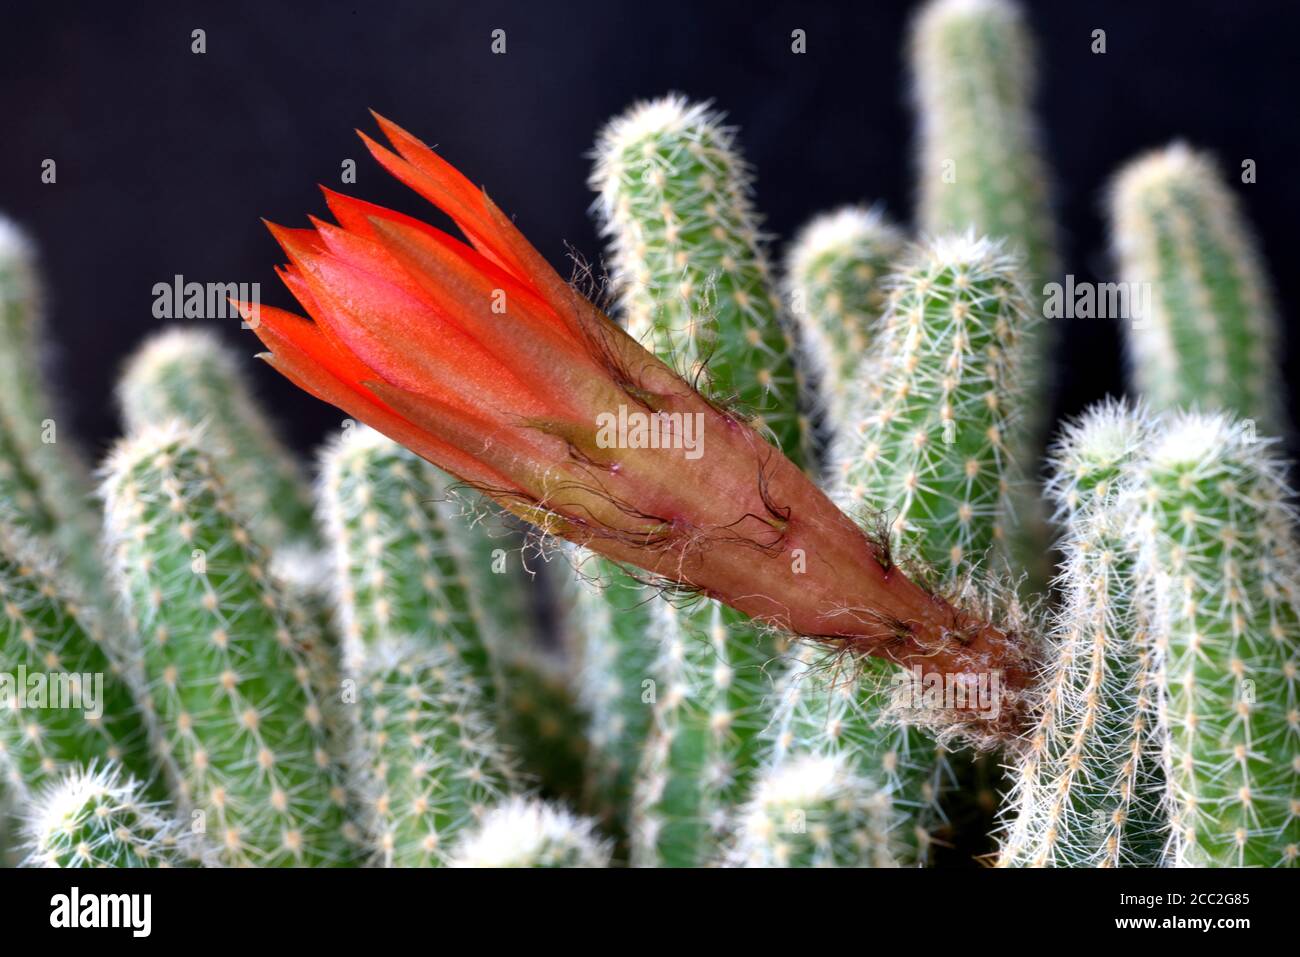 The flower bud of the Ladyfinger Cactus (Mammillaria sp) beginning to open in Southern England Stock Photo